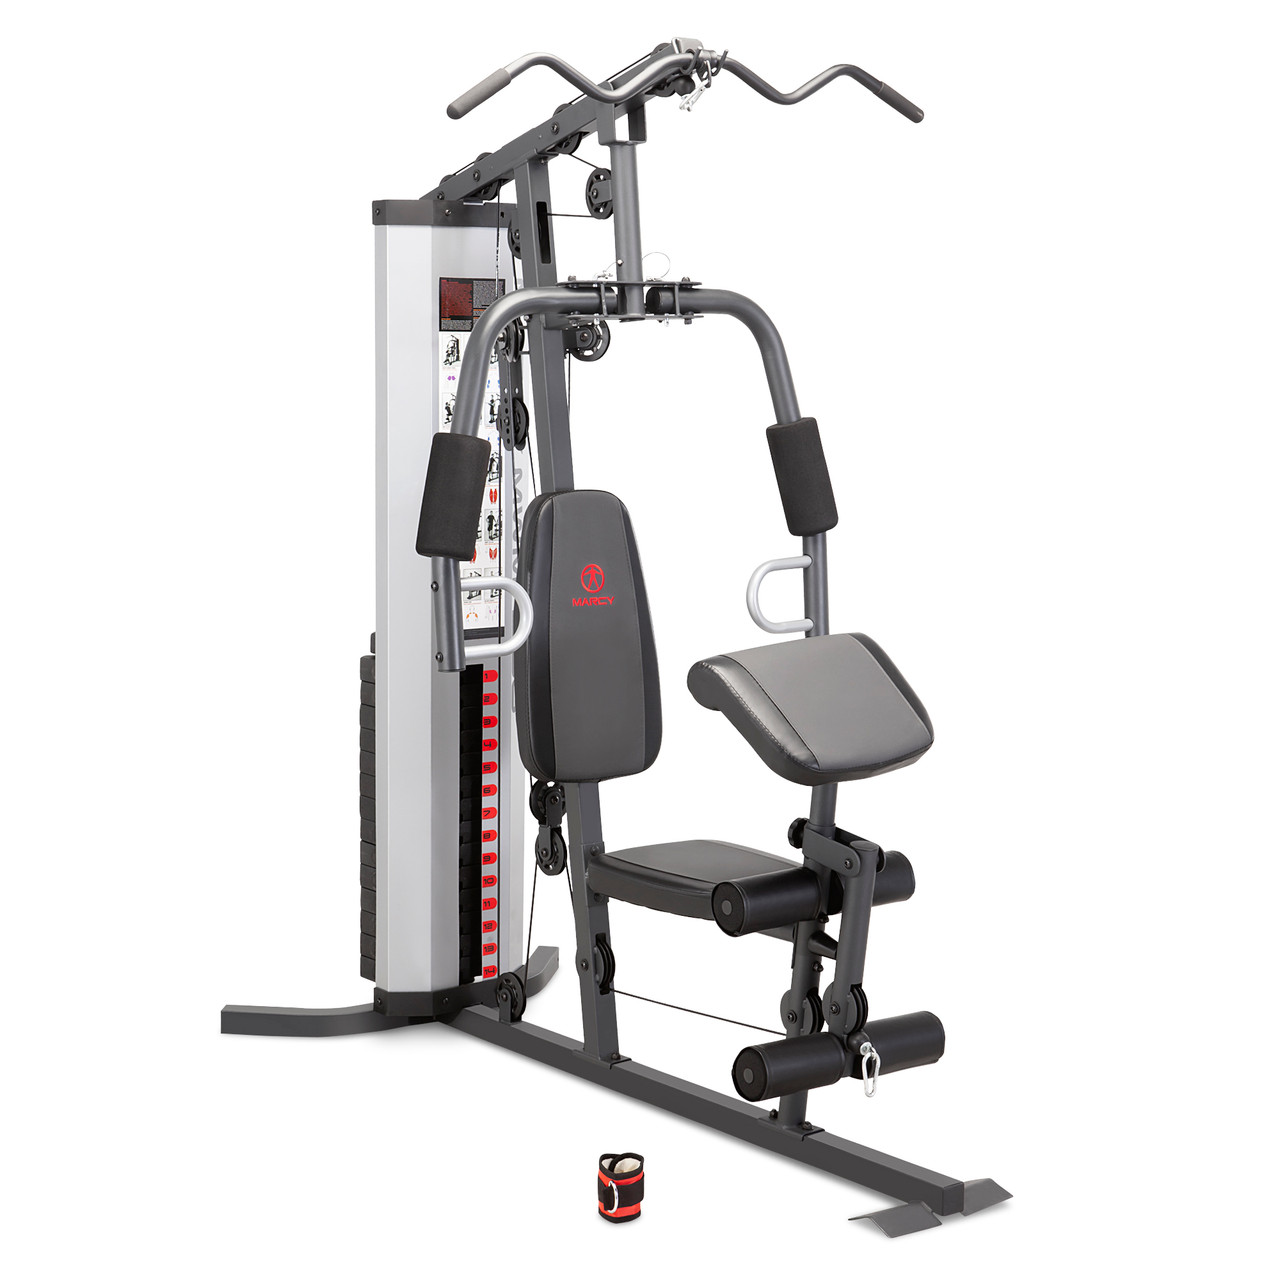 Best Home-Gym Equipment and Reviews